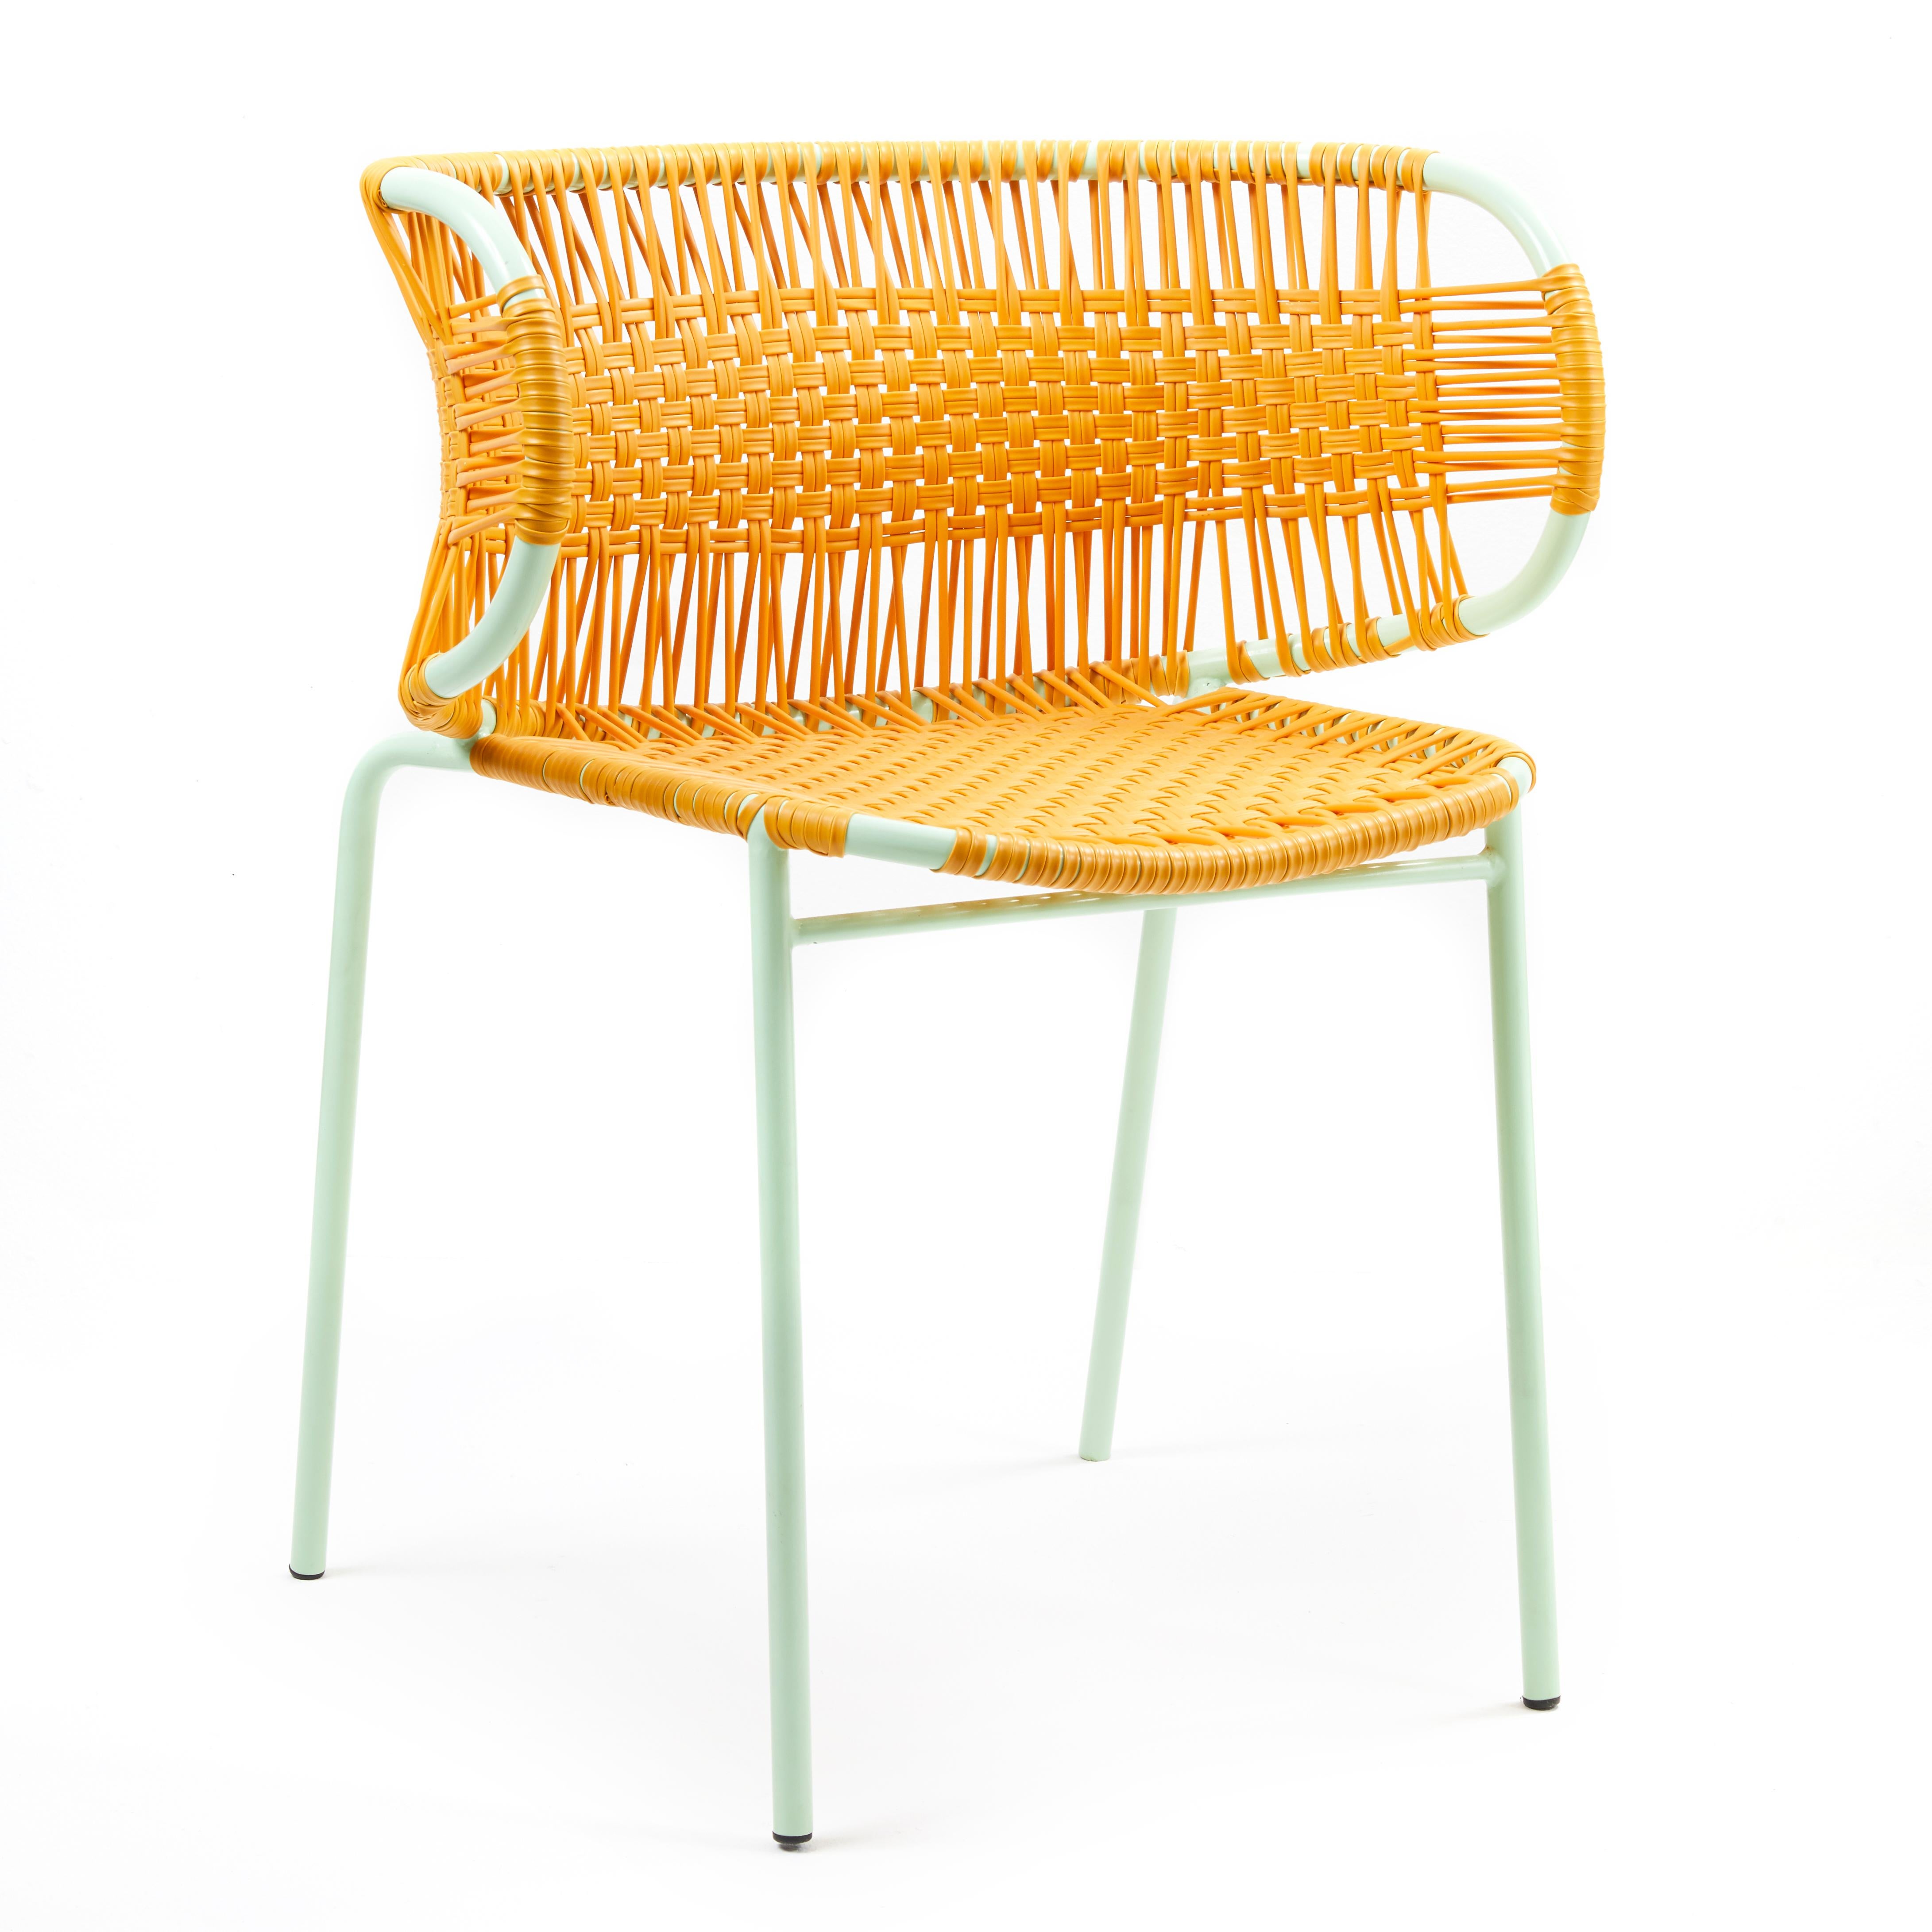 Set of 4 honey Cielo stacking chair with armrest by Sebastian Herkner
Materials: galvanized and powder-coated tubular steel. PVC strings are made from recycled plastic.
Technique: made from recycled plastic and weaved by local craftspeople in